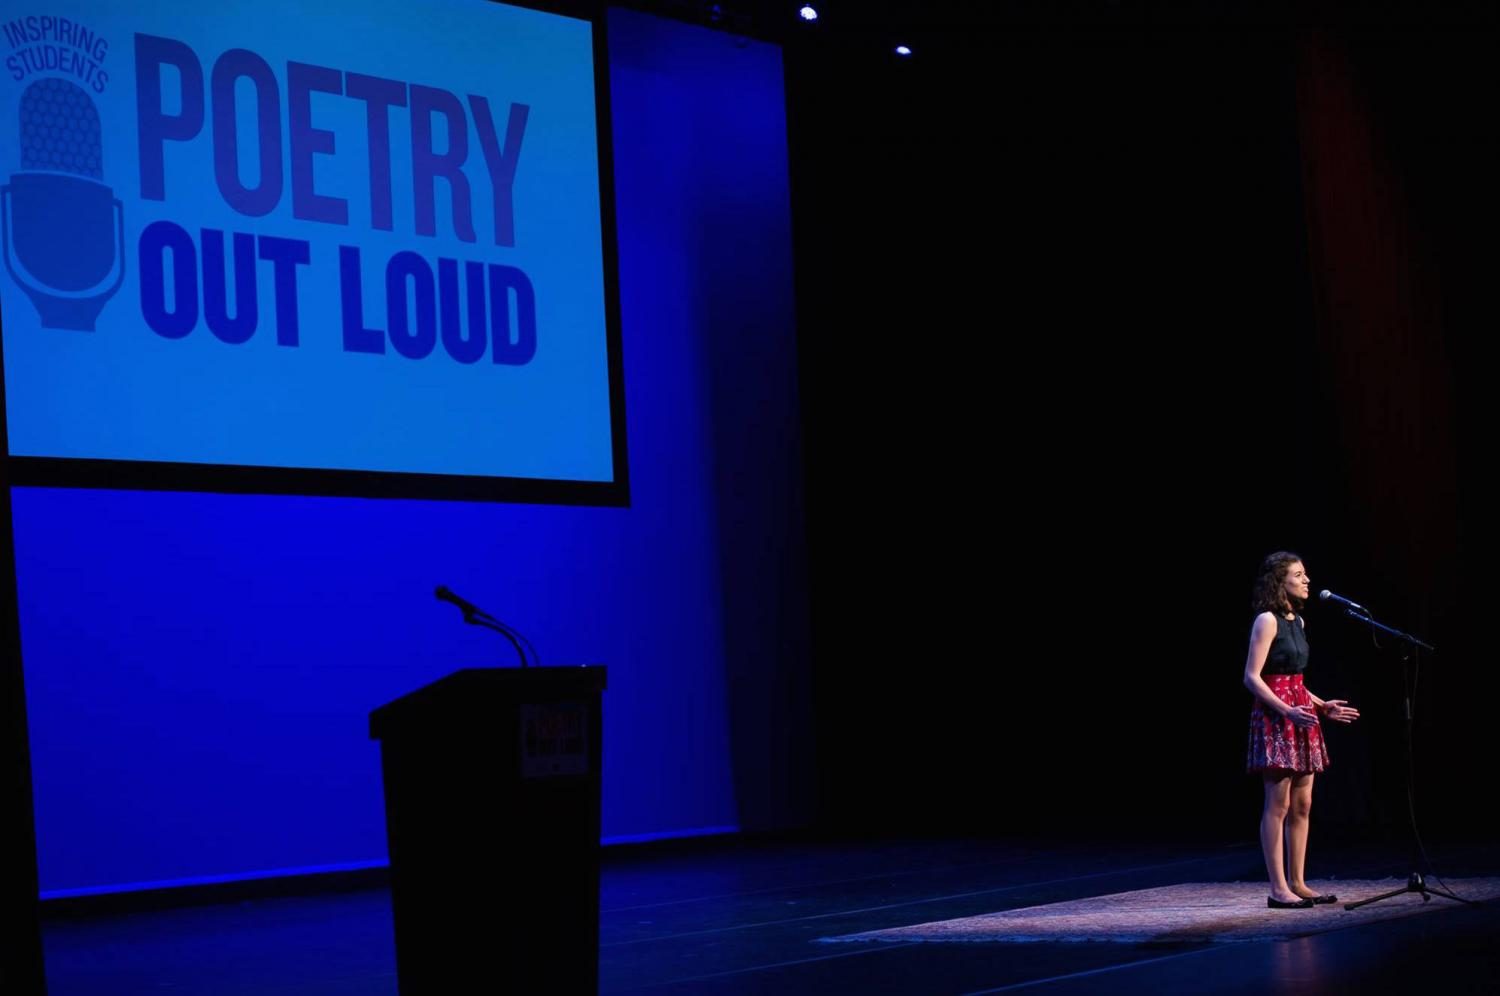 Cecilia Ergueta on stage during the Poetry Out Loud competition